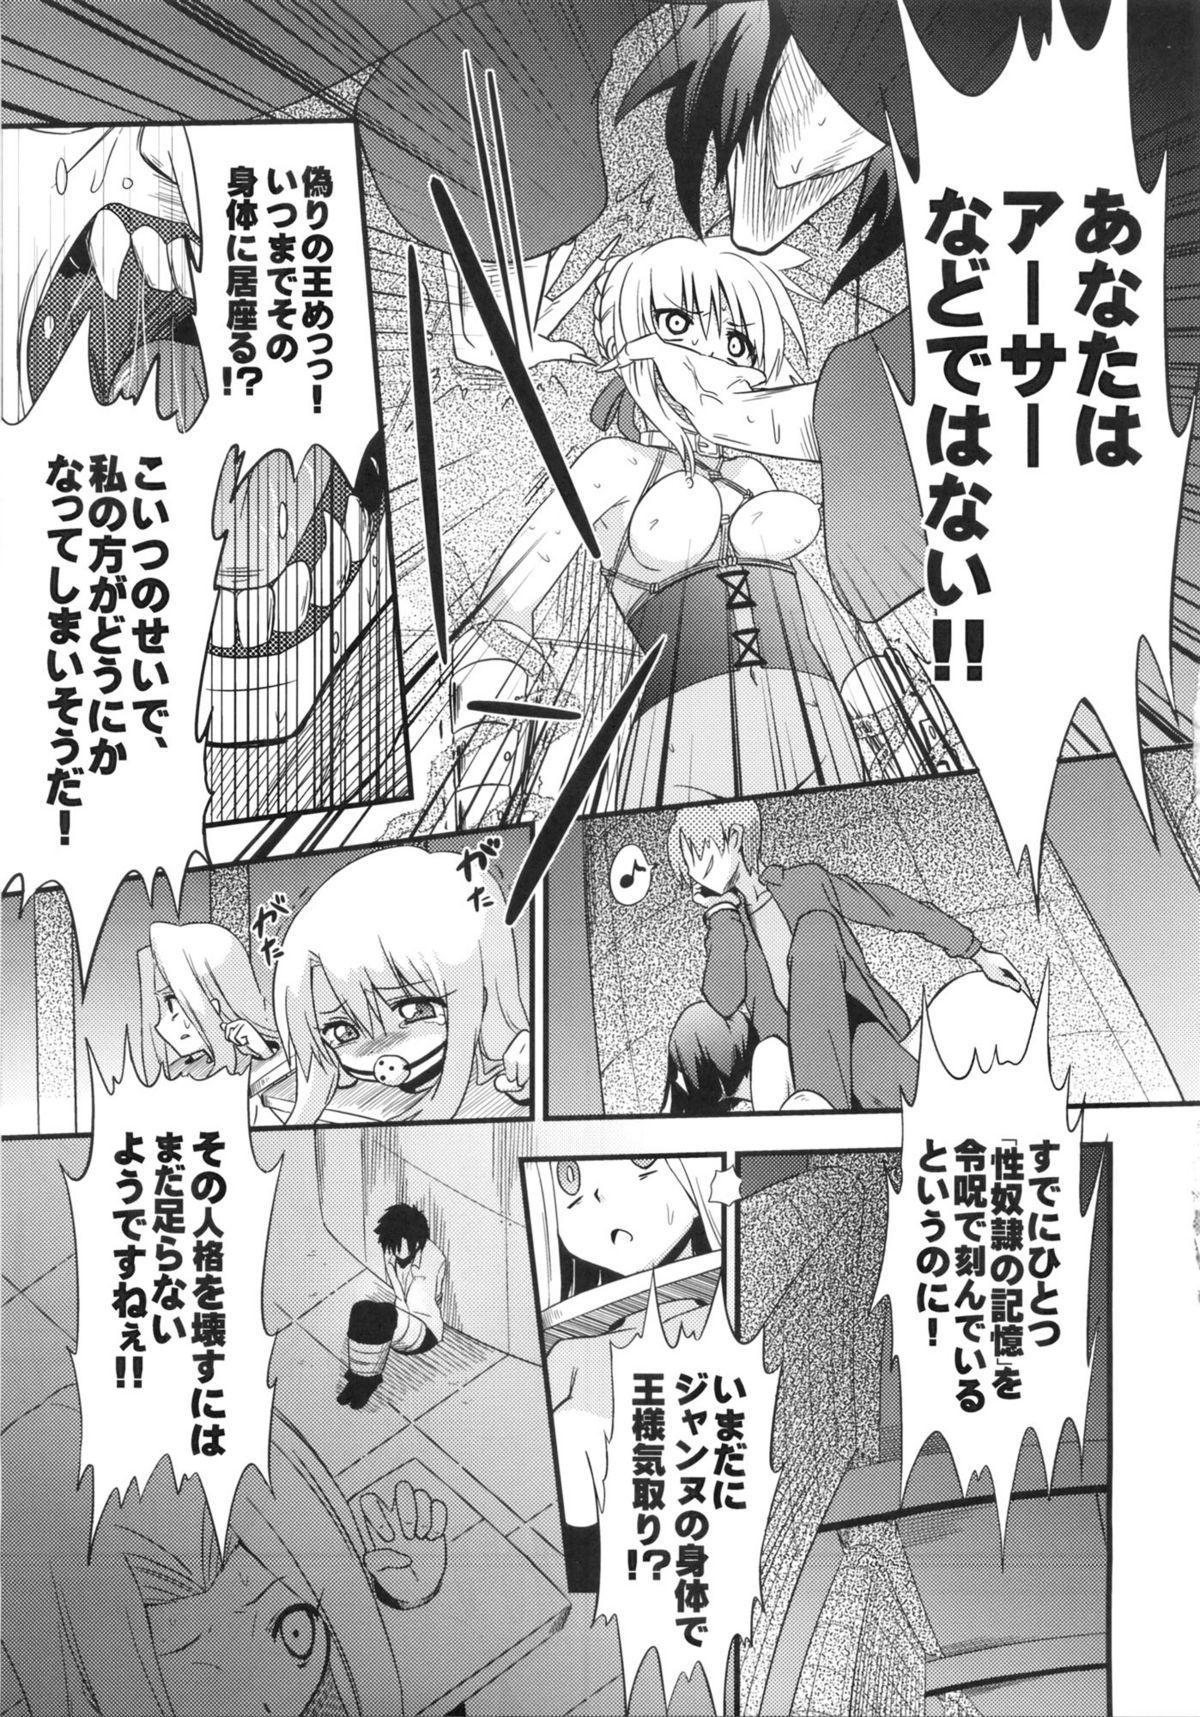 Perfect Pussy D no Kishiou II - Fate stay night Fate zero With - Page 4